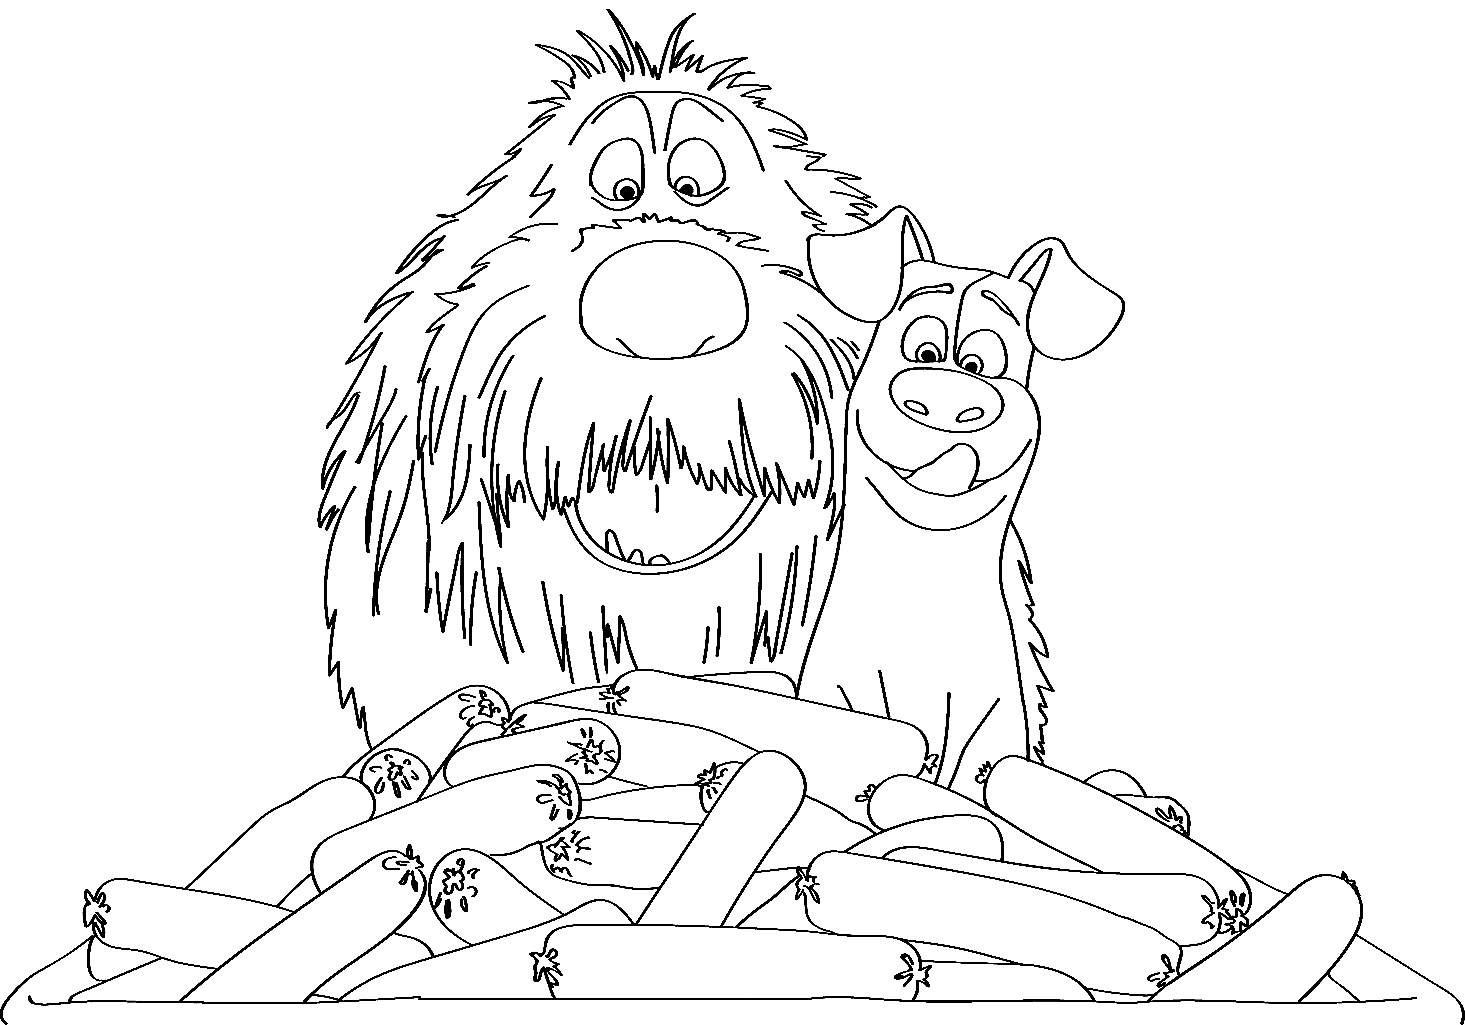 Duke and Max Coloring Page